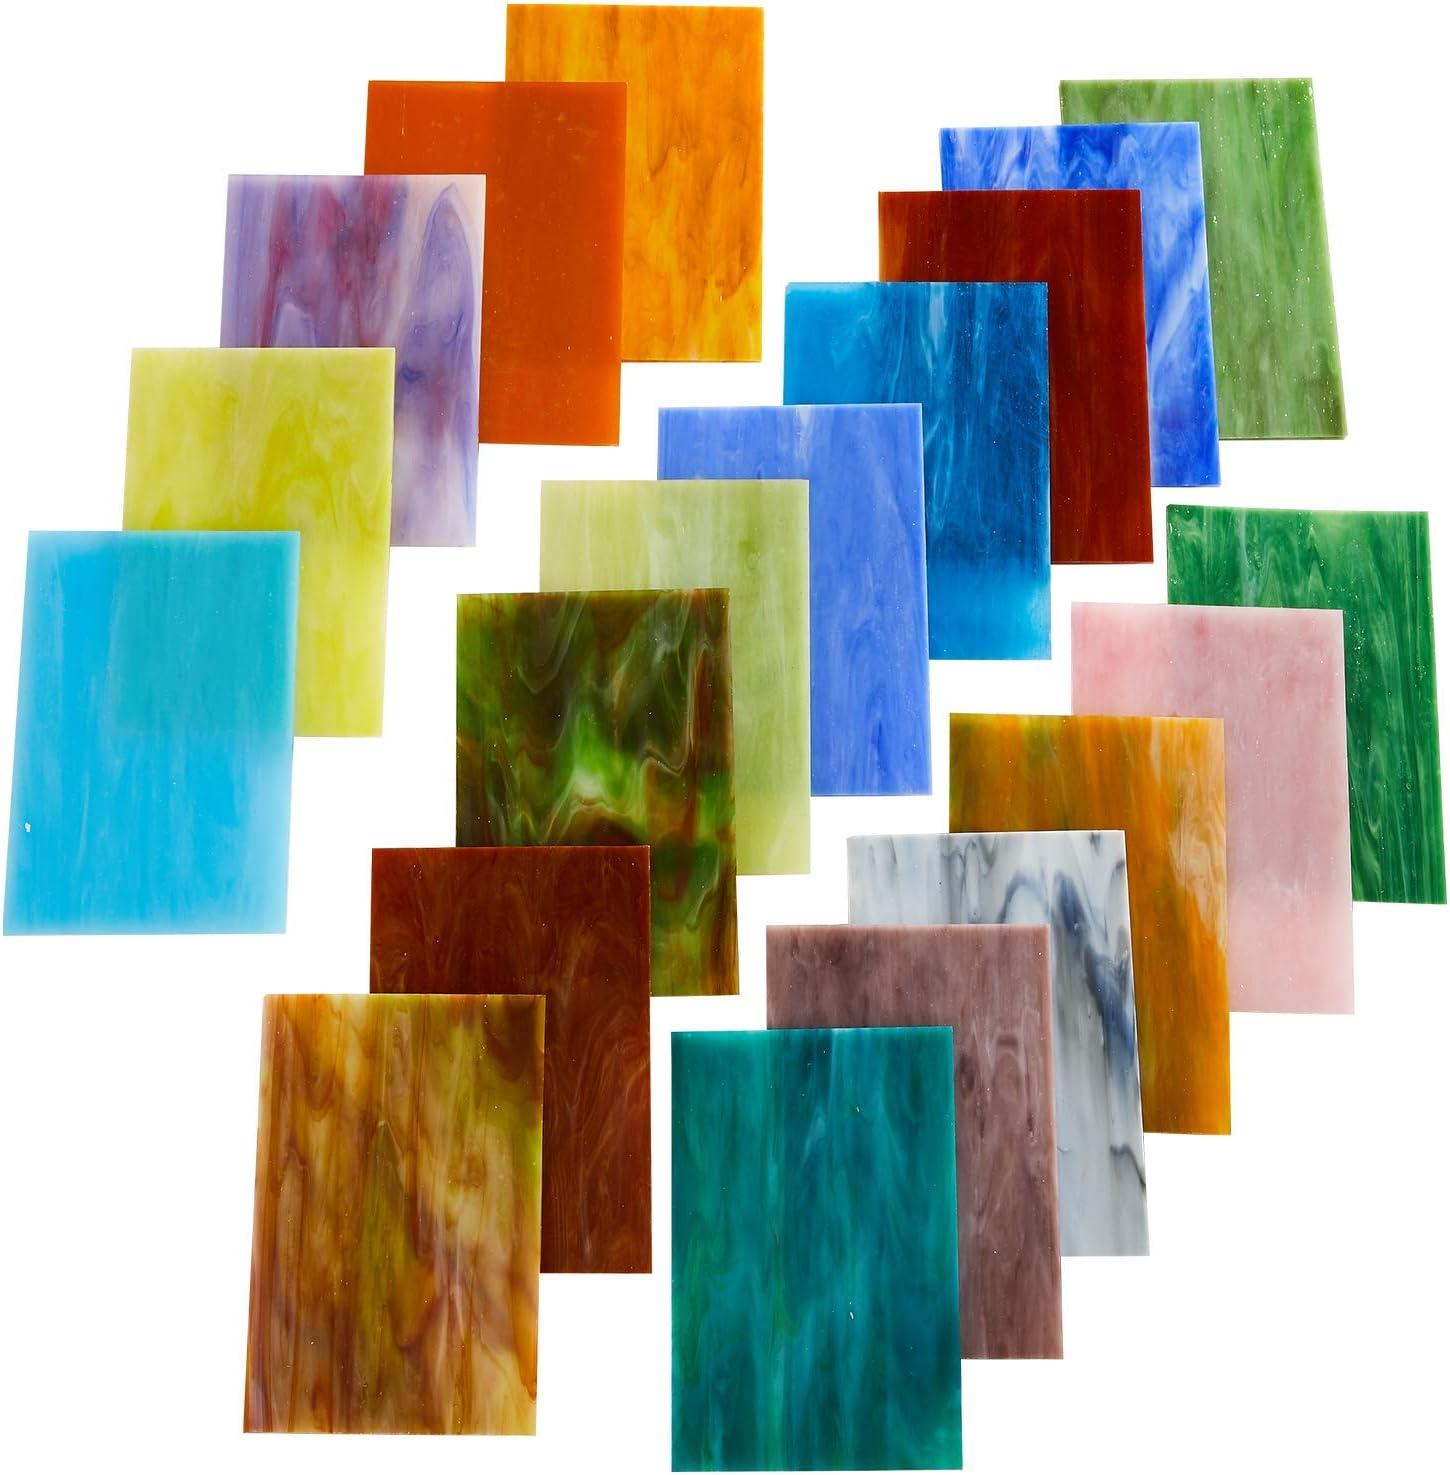 10 Sheets of Stained Glass Sheets, 4x6 Inch Variety Stained Glass Packs  Free Shipping, Opals Cathedralsglass for Mosaics&art Crafts -  Hong Kong